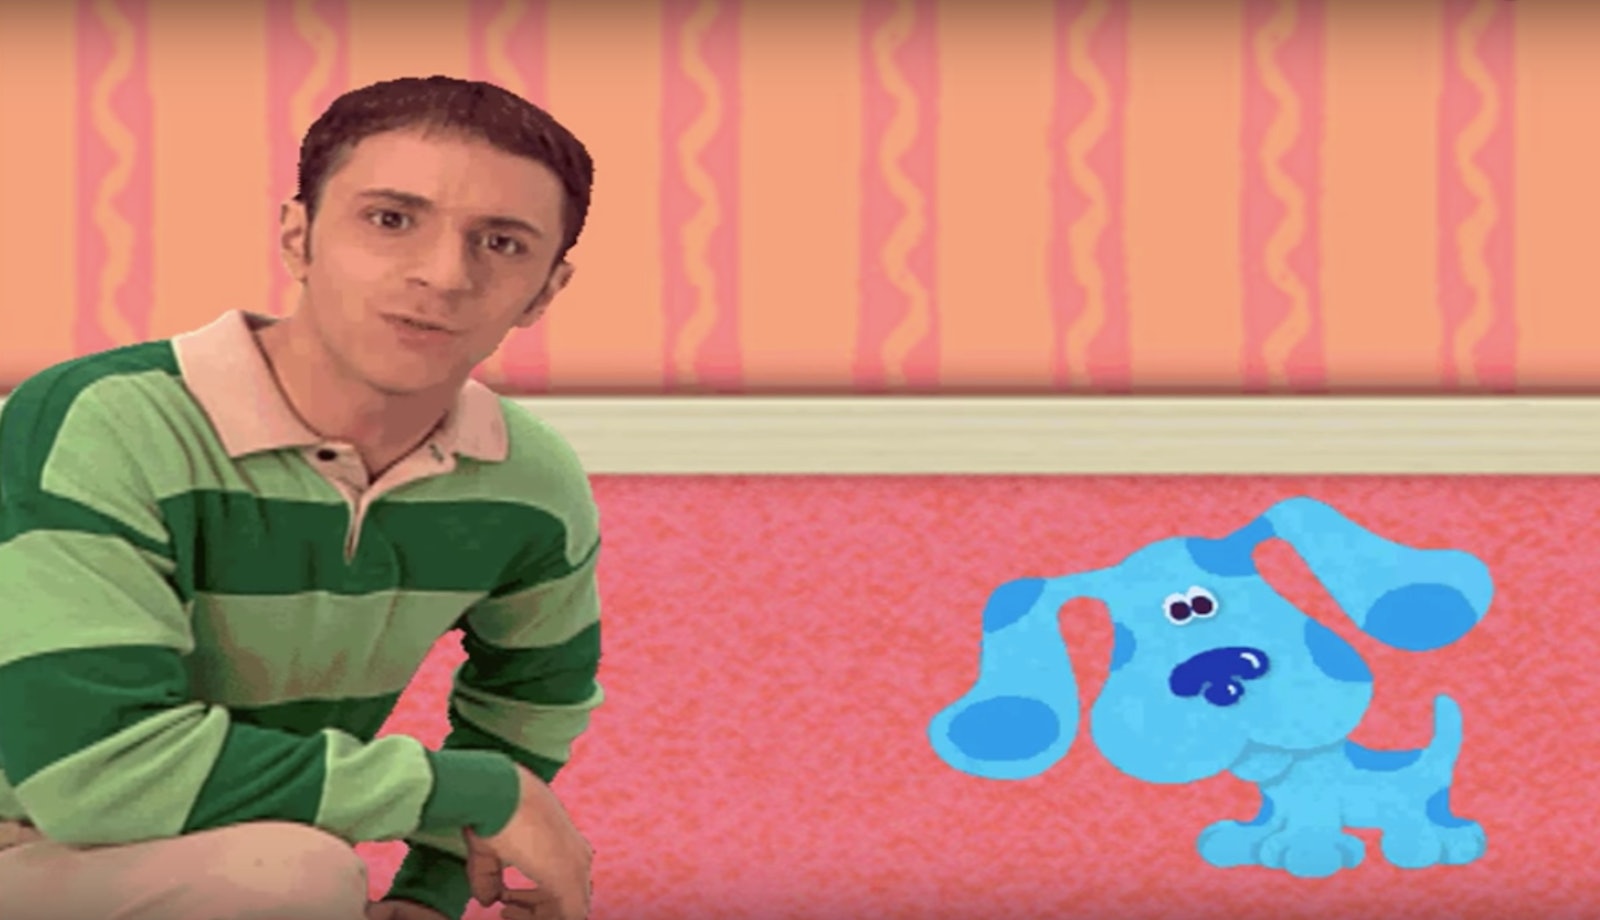 Steve From ‘Blues Clues’ Wants To Host The Reboot & He's Putting Up A Fight